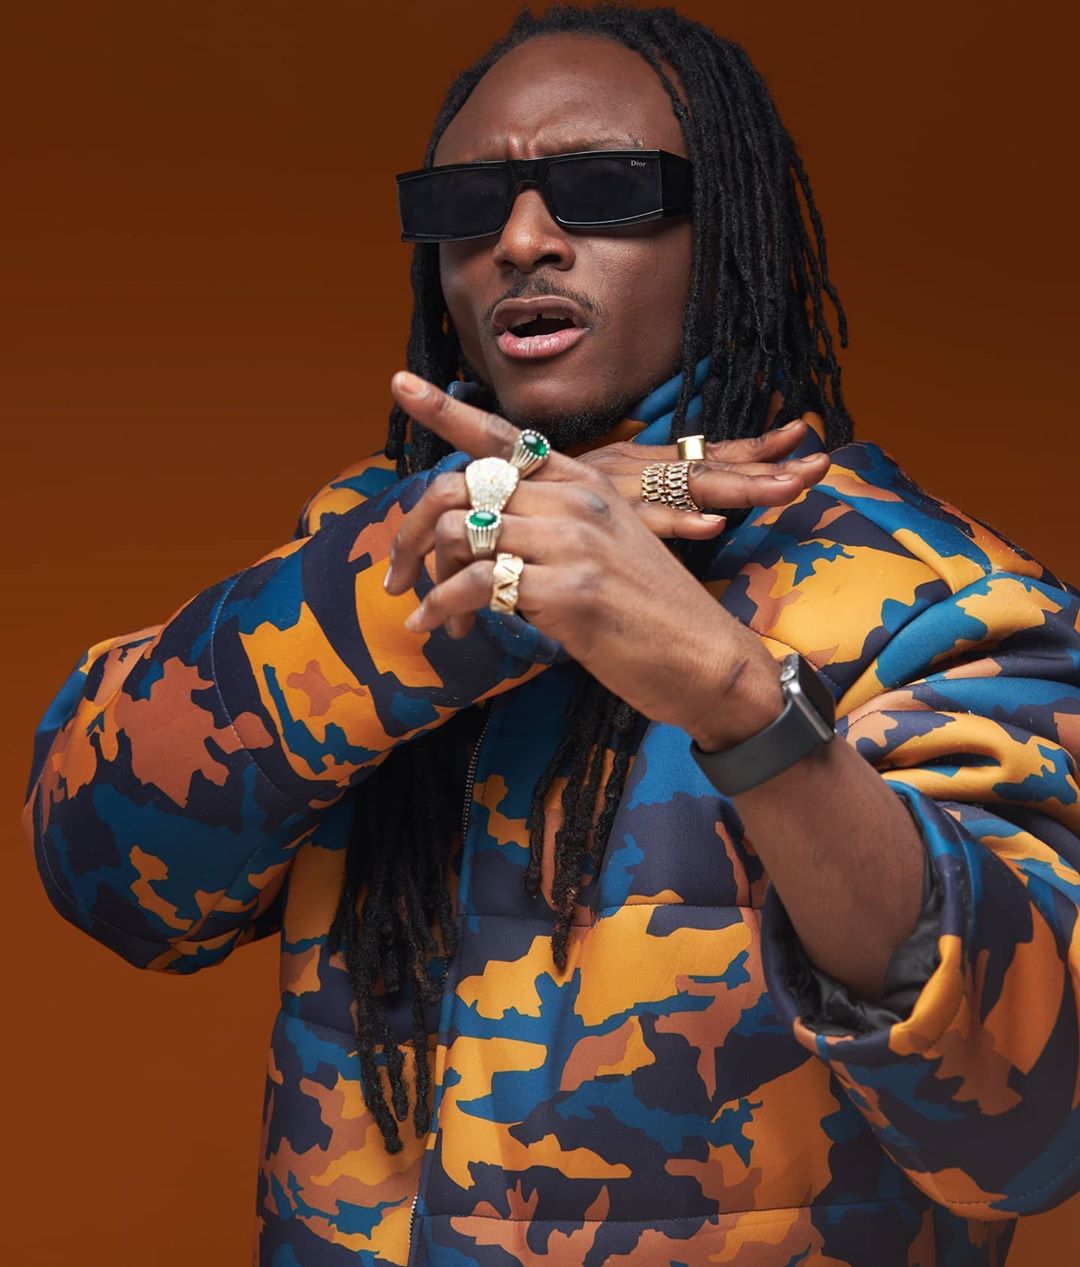 "I still wipe outside, everyone does" - Terry G admits cheating on his partner 